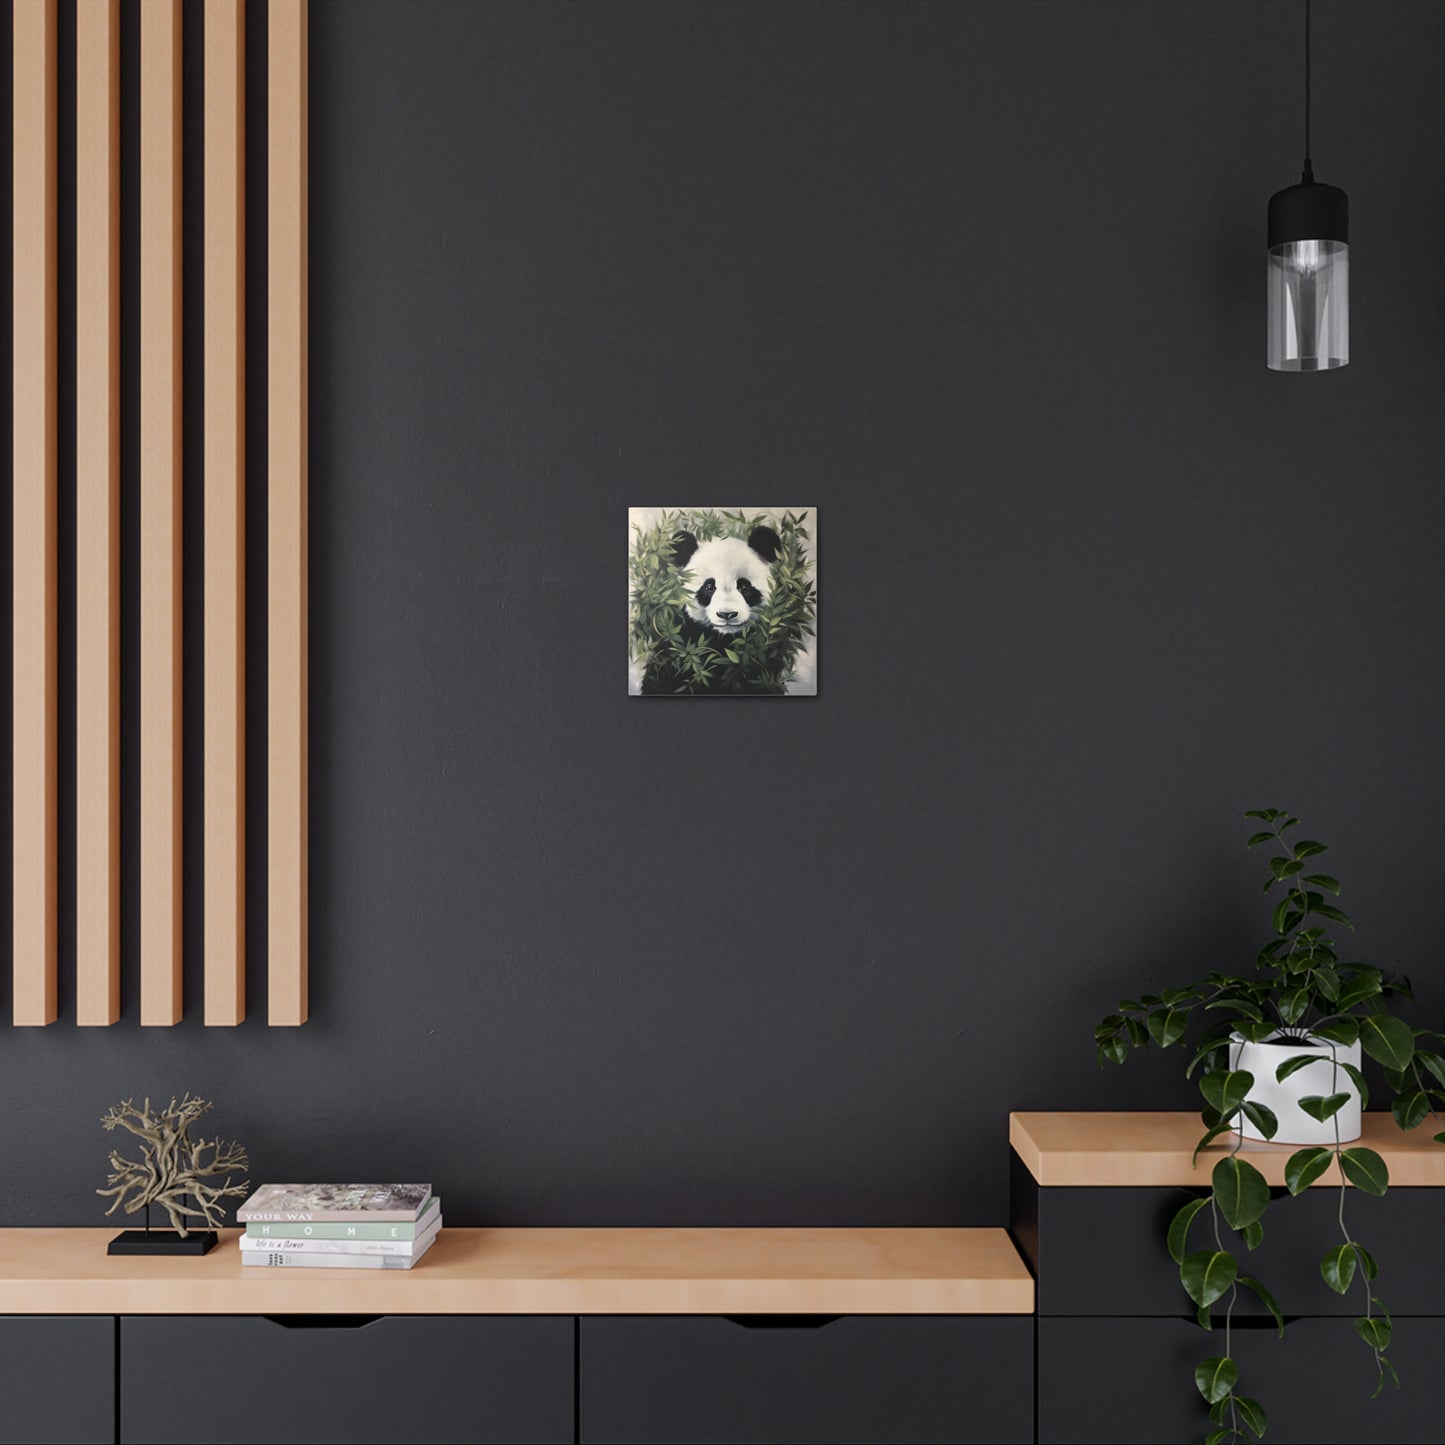 Panda Prints: For the Artistically Inclined